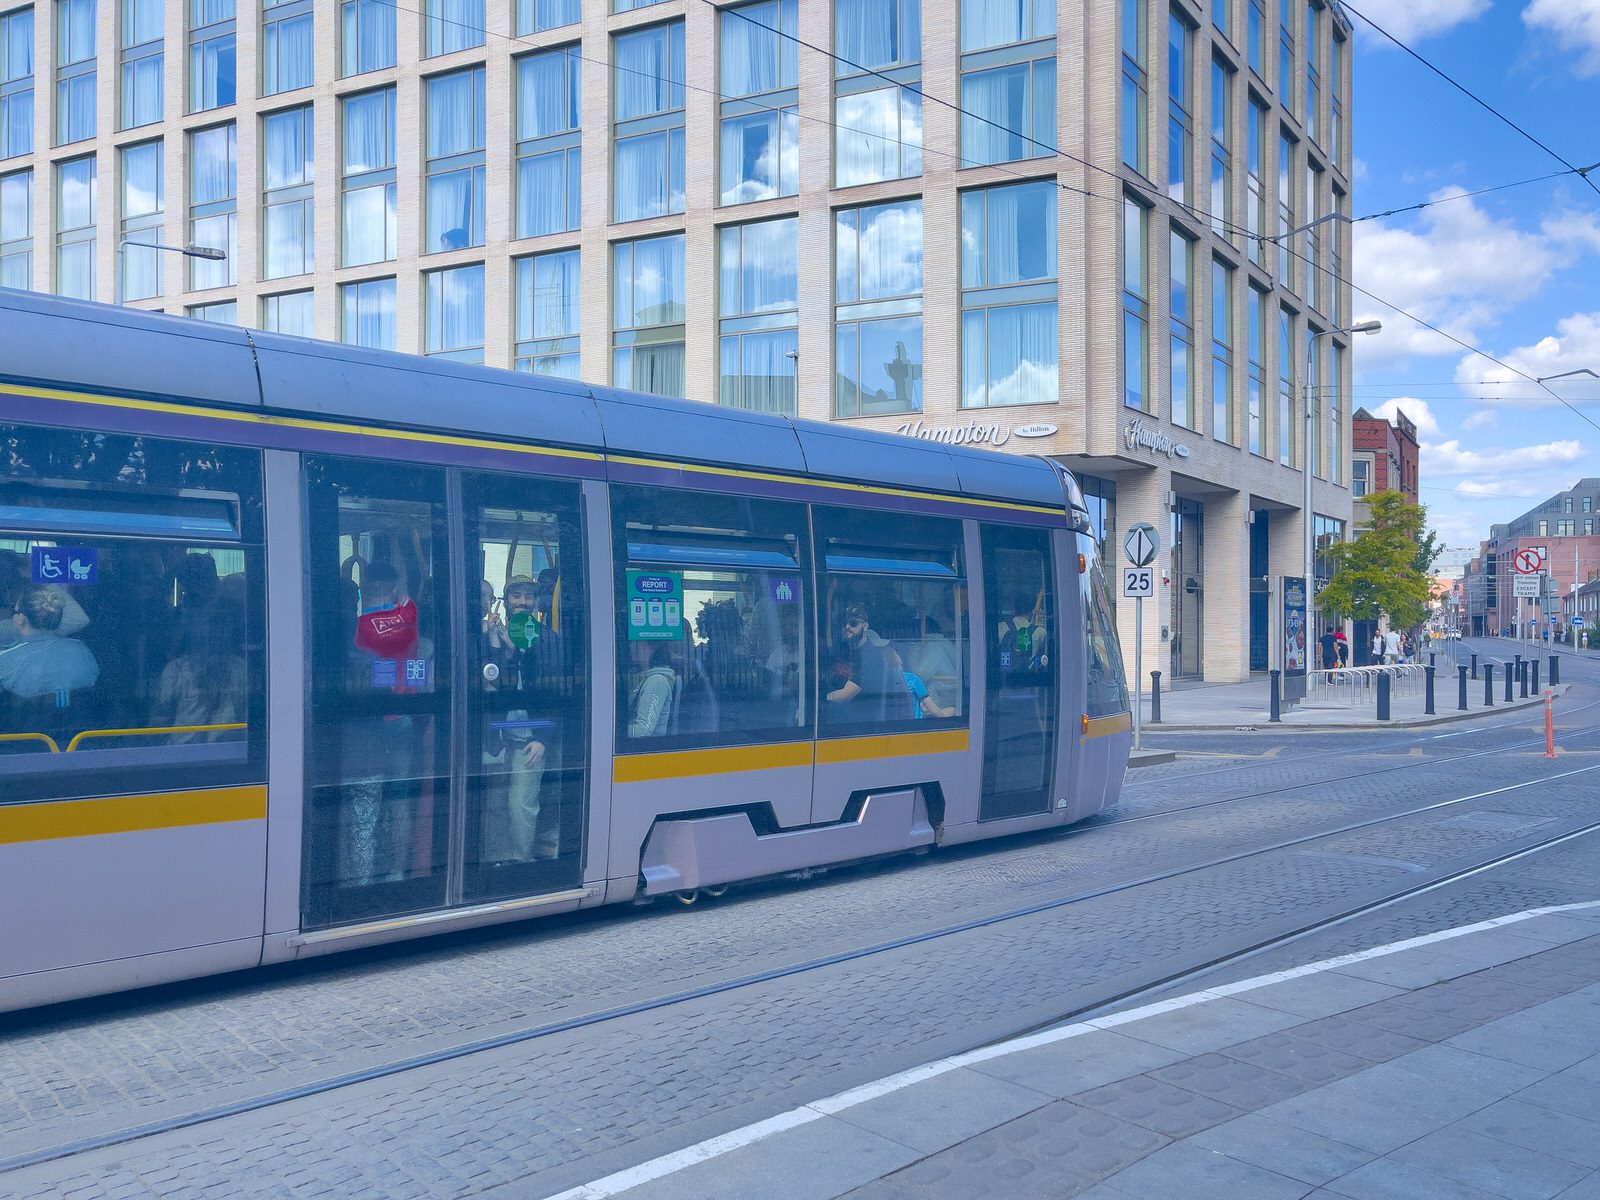 THE LUAS FOUR COURTS TRAM STOP [THERE IS MUCH TO BE SEEN HERE]-234107-1